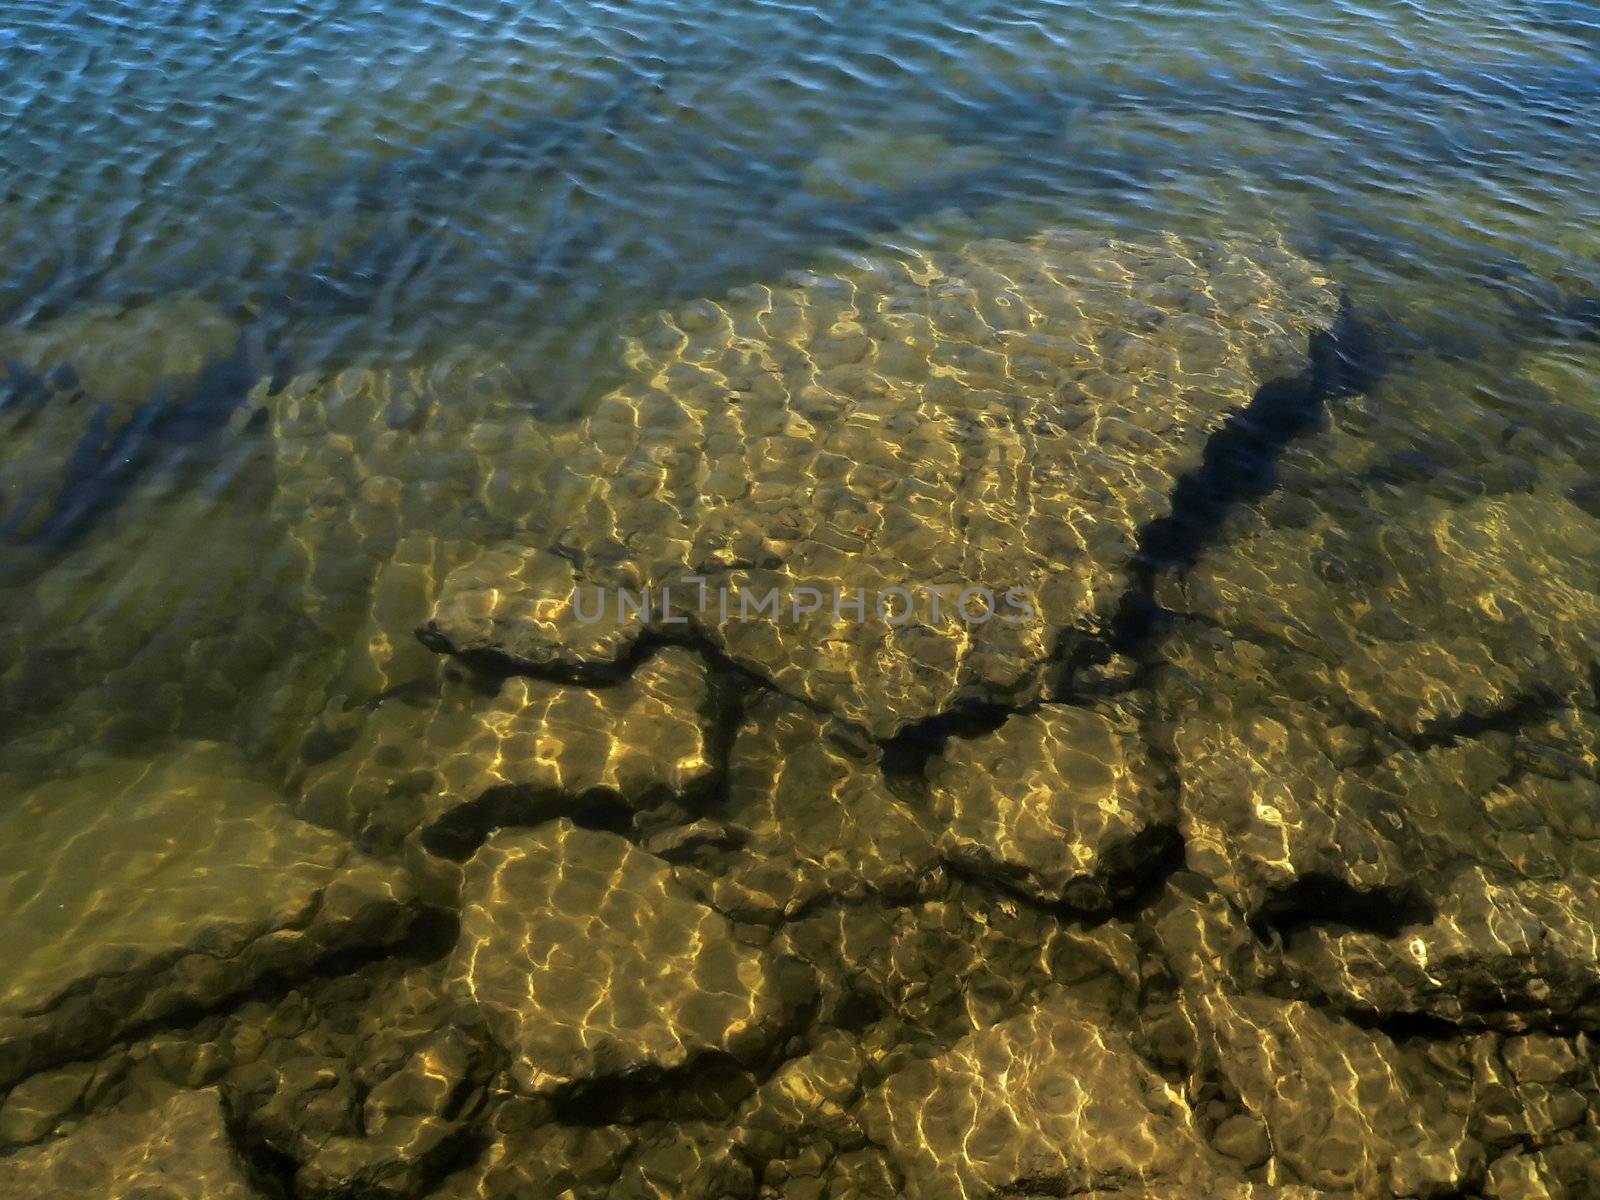 Series of the texture (Sea pebbles under the water)